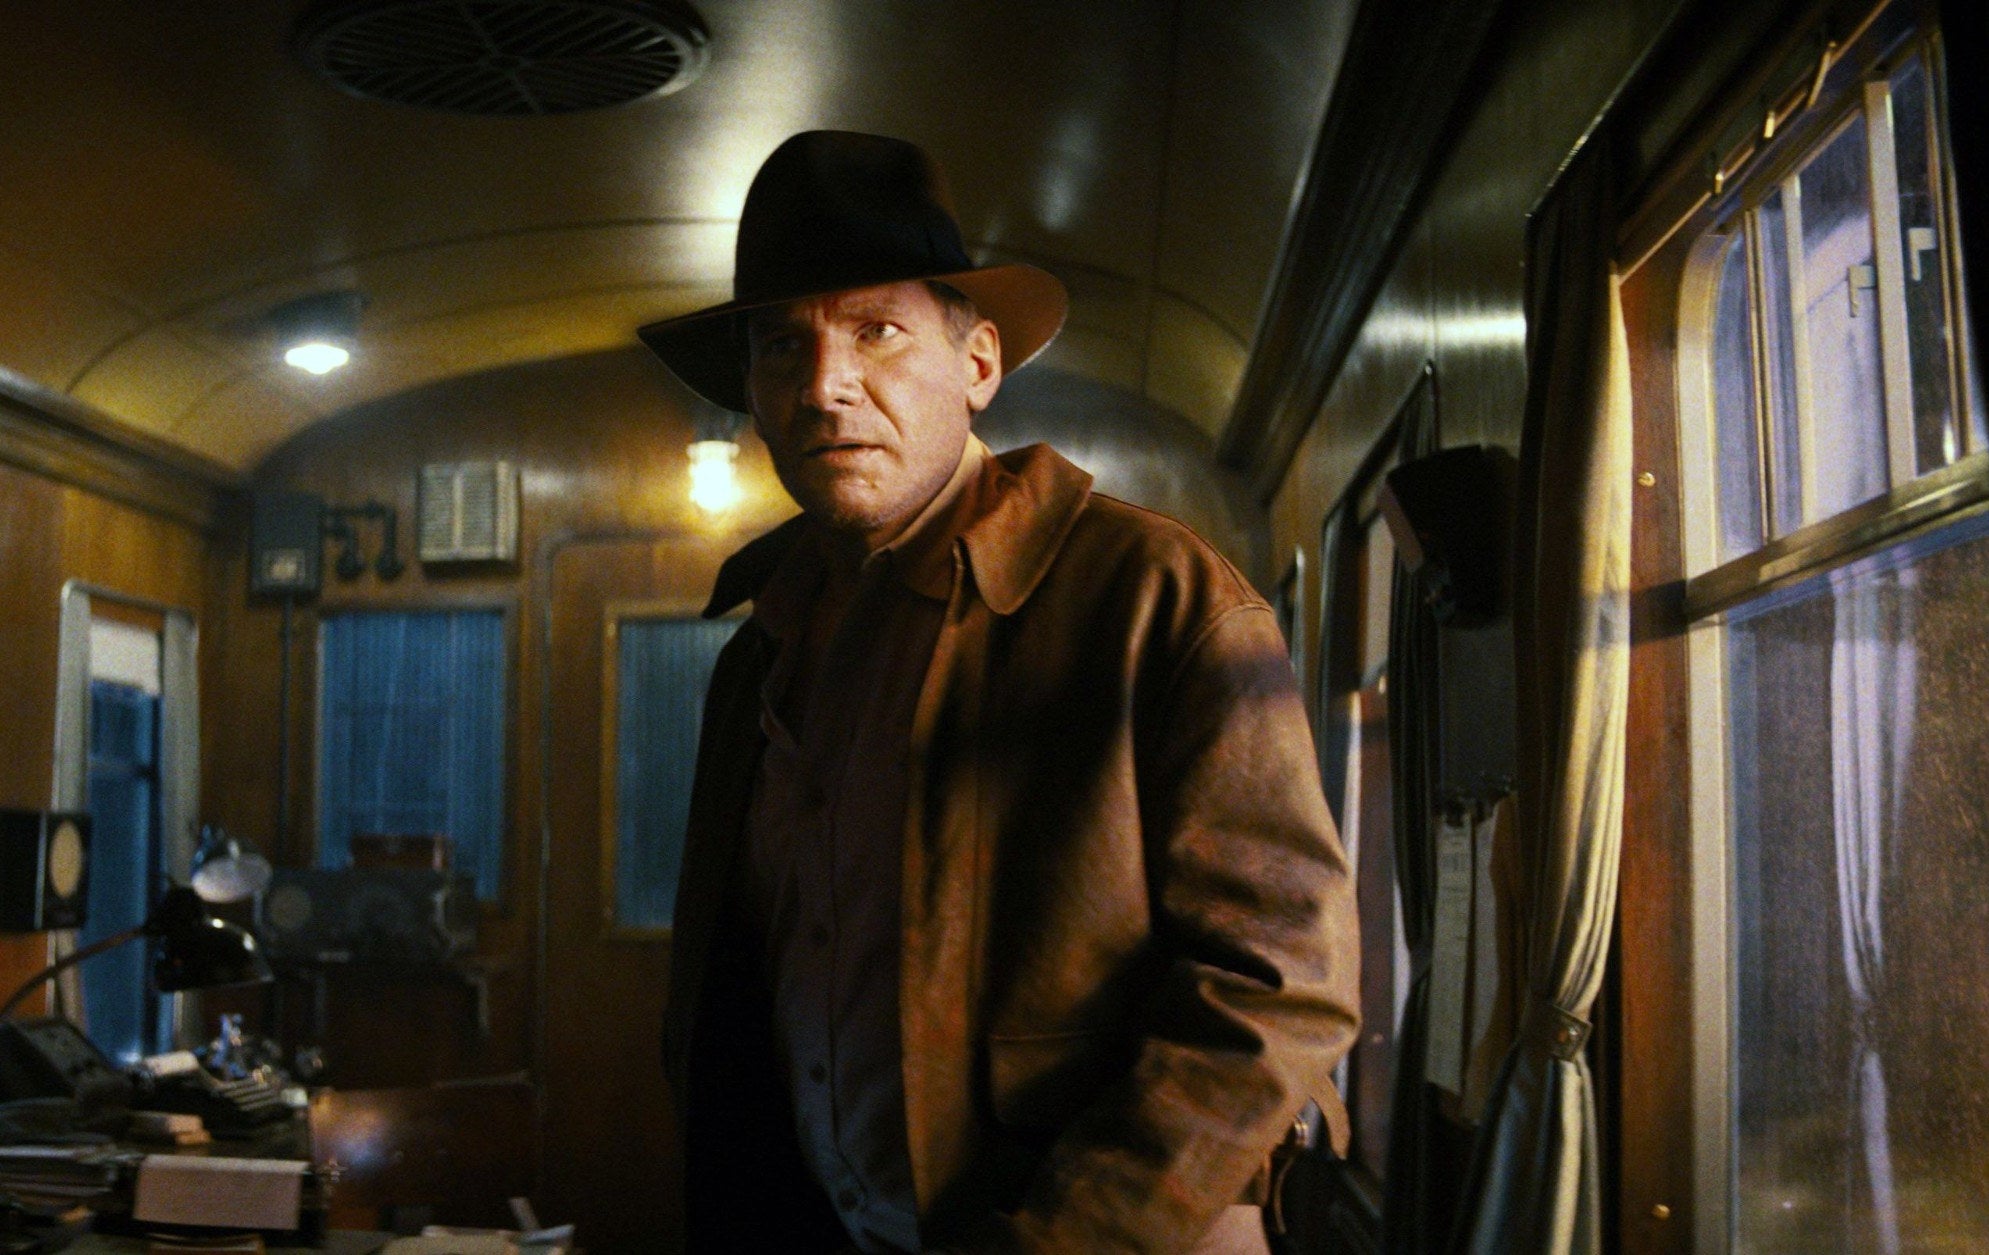 A de-aged Indiana Jones wearing his iconic hat